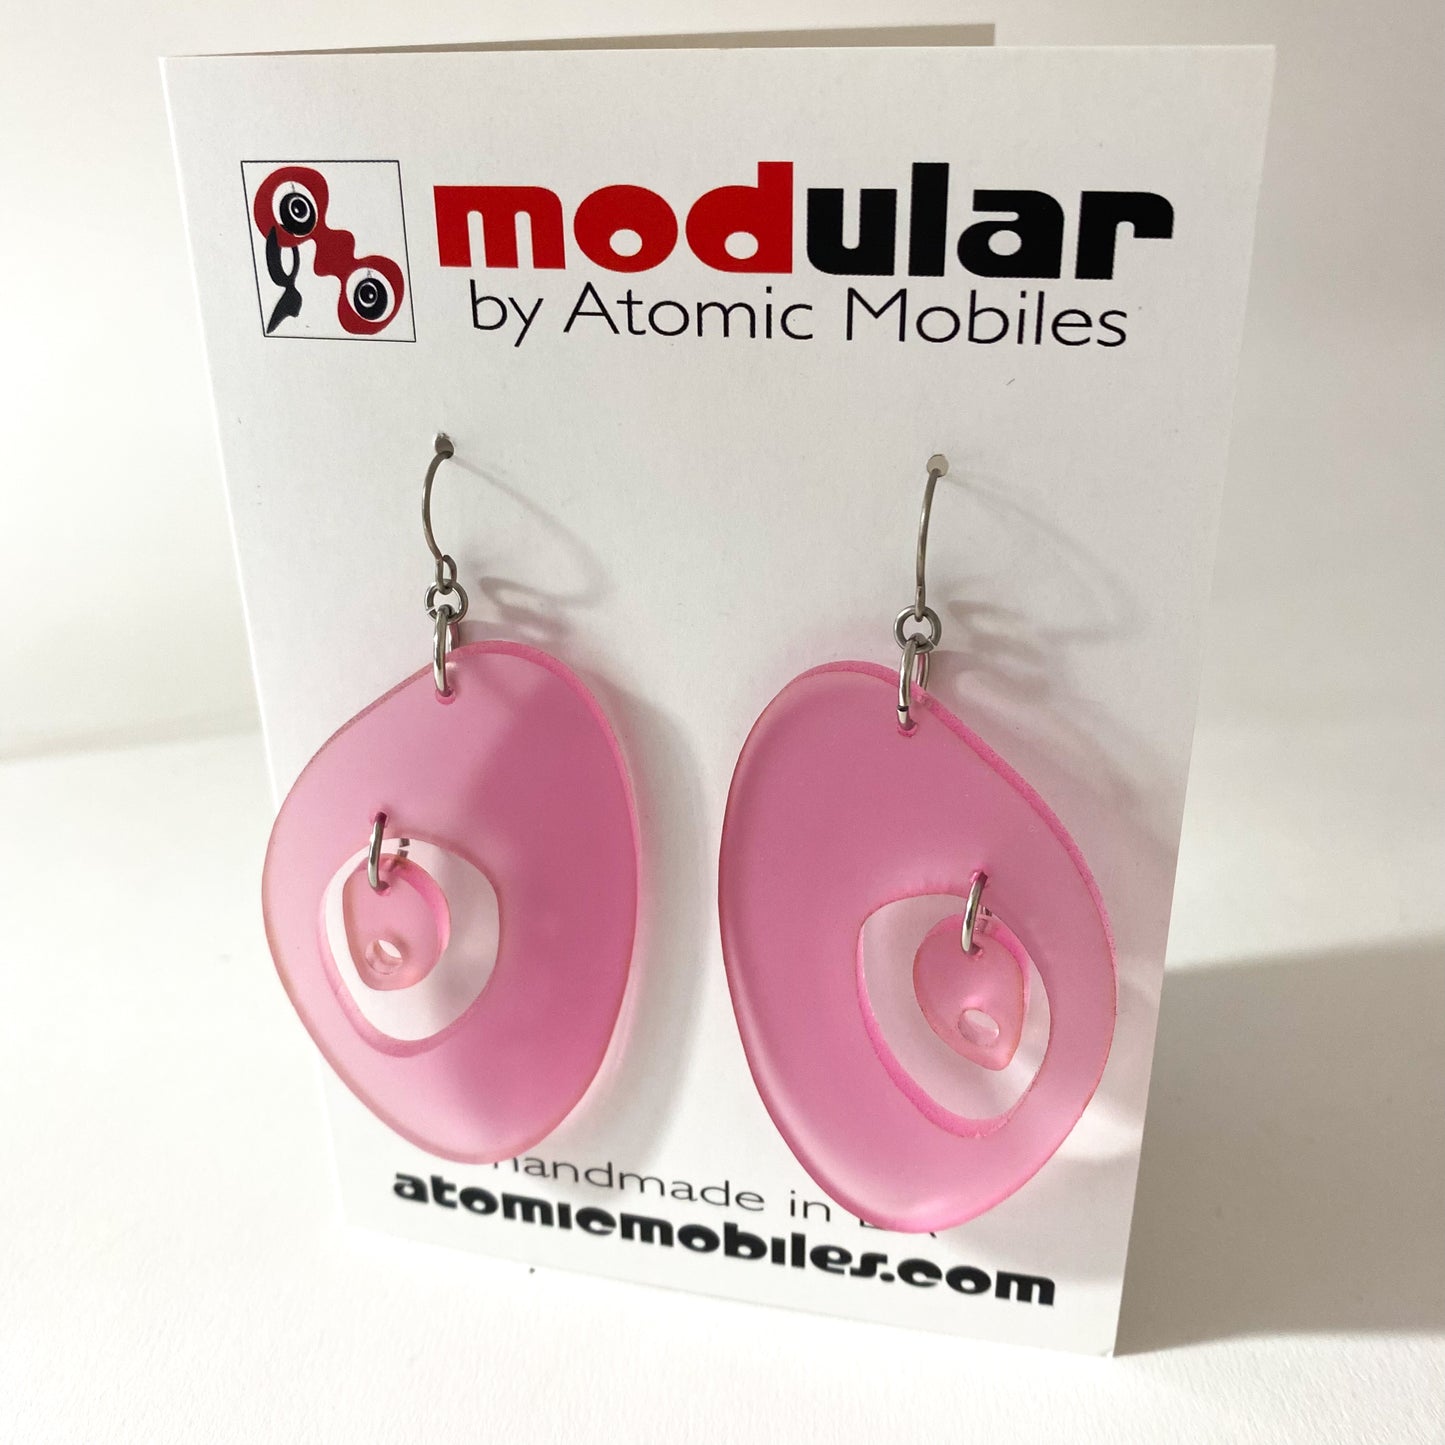 Frosted Pink The Modernist retro mid century modern statement fashion earrings by AtomicMobiles.com